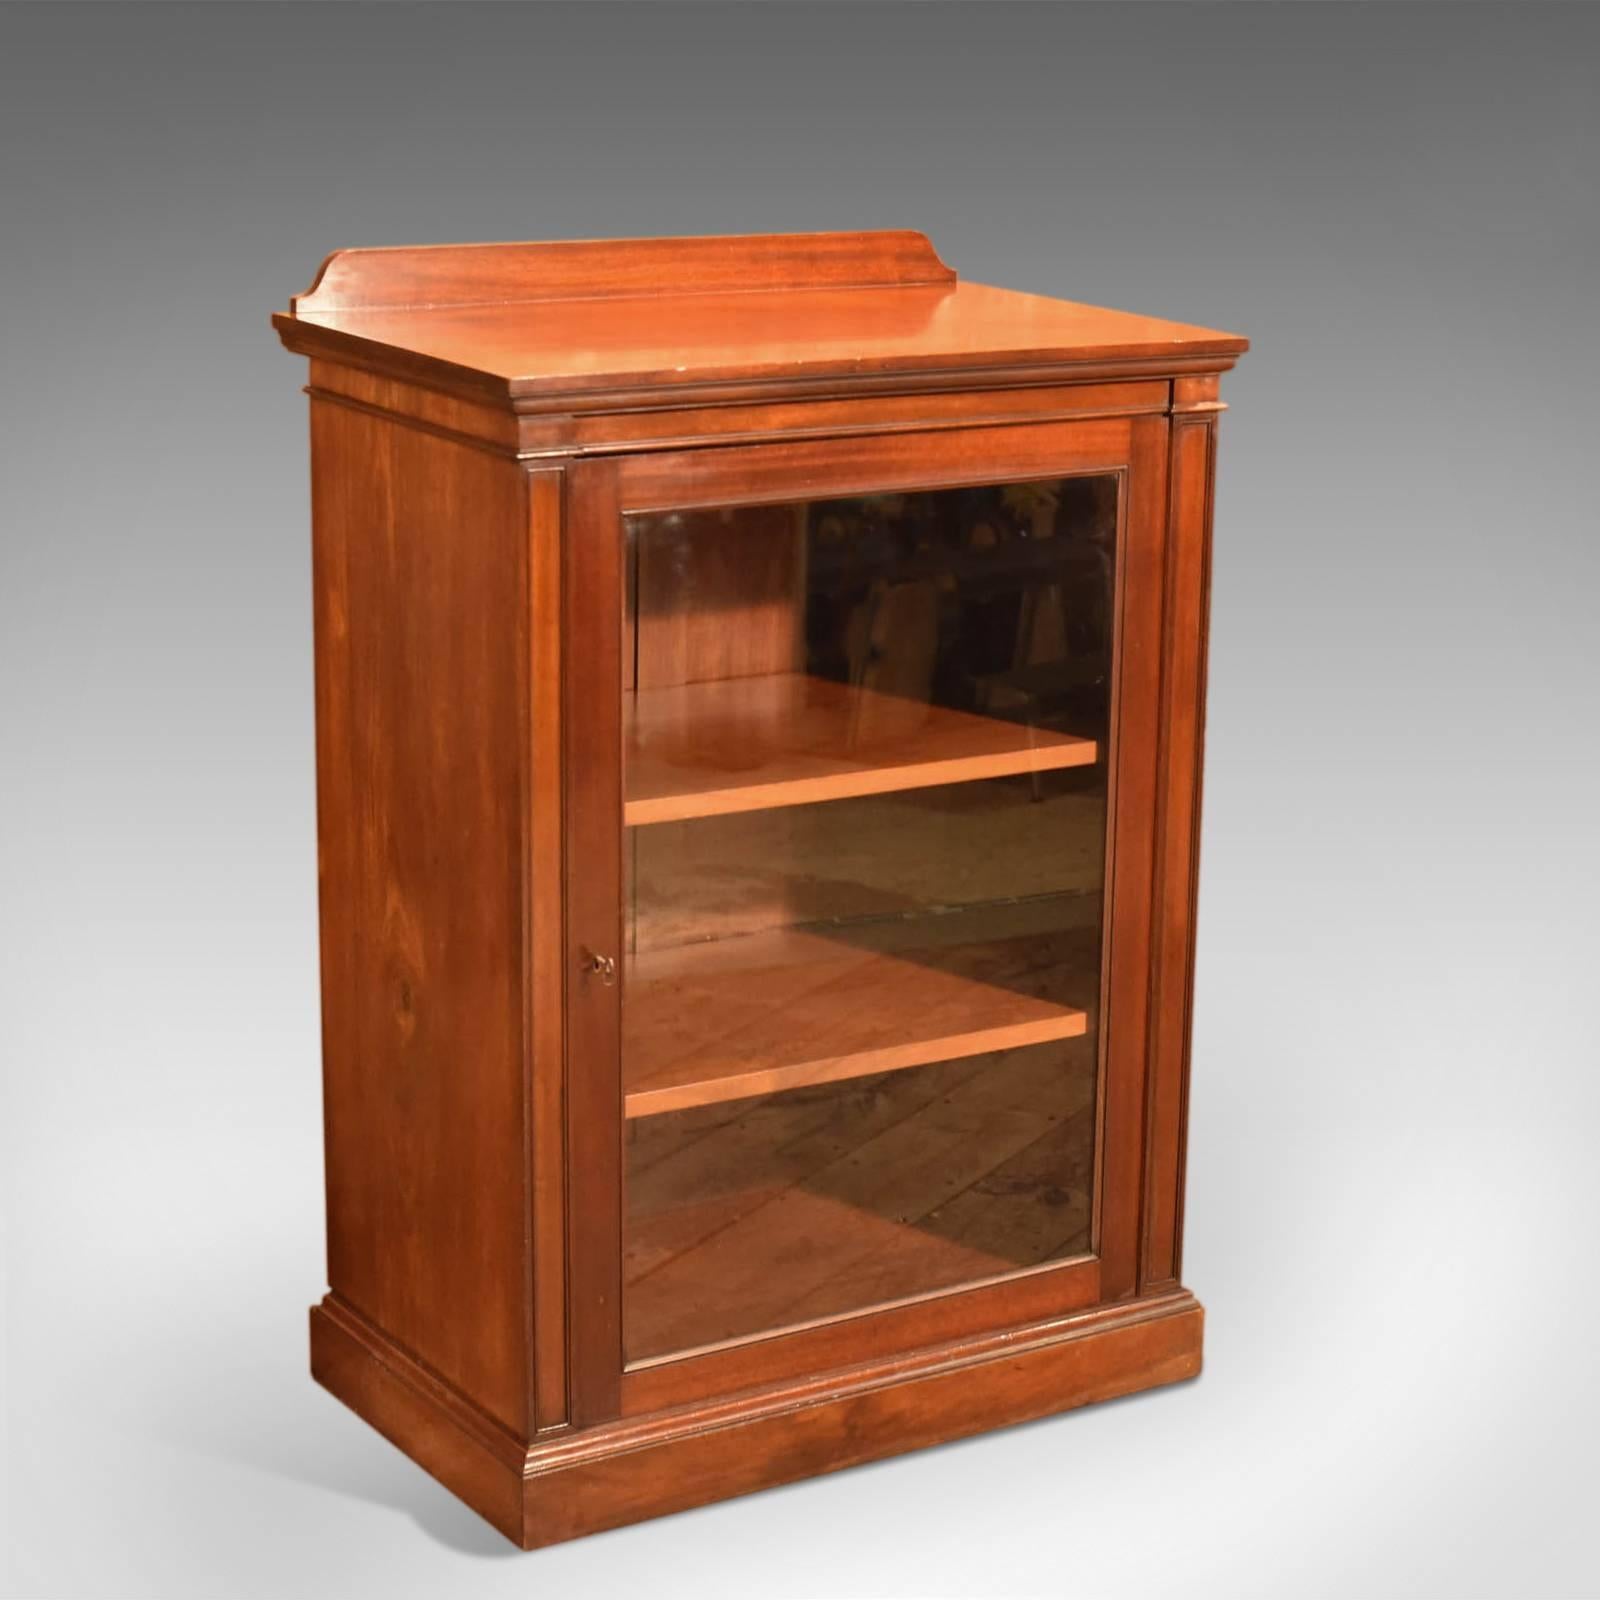 This is an antique, Victorian display cabinet with maritime proportion.

The mahogany in this generously sized pier cabinet displays with a deep, lustrous shine and a desirable aged patina.

Raised on a plinth base the deep, adjustable shelving